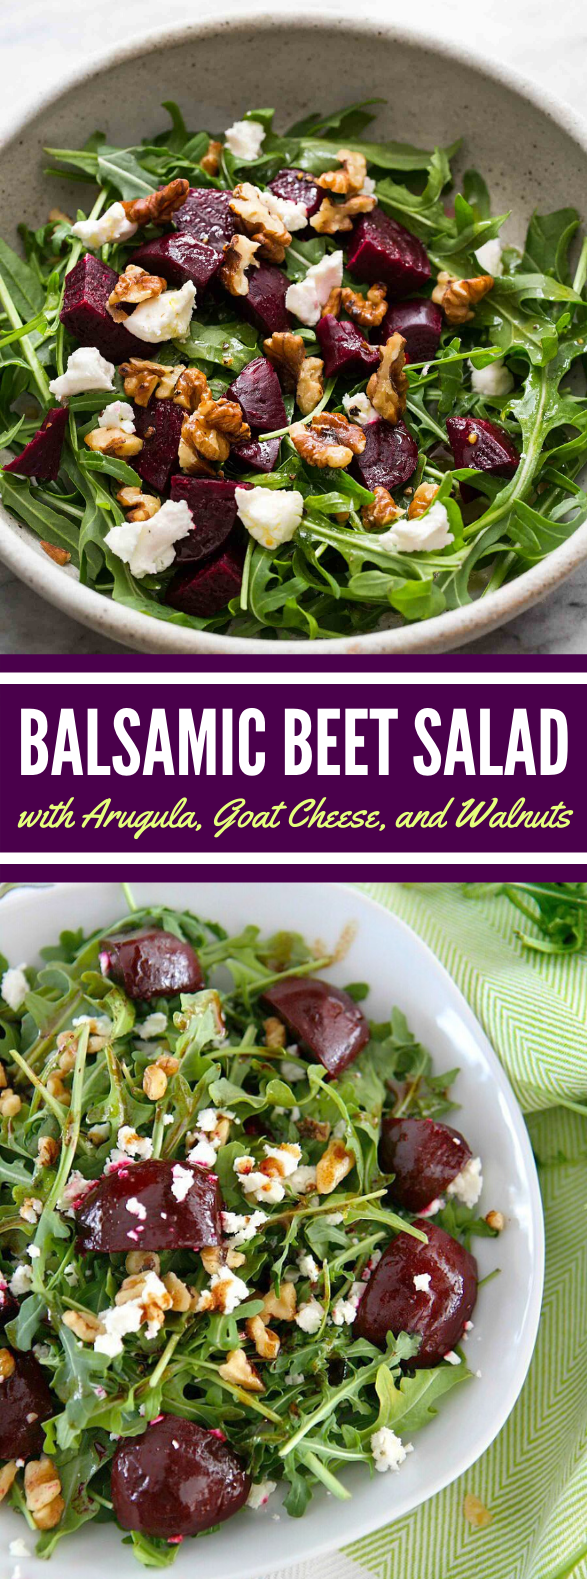 BALSAMIC BEET SALAD WITH ARUGULA, GOAT CHEESE, AND WALNUTS #vegetarian #lunch